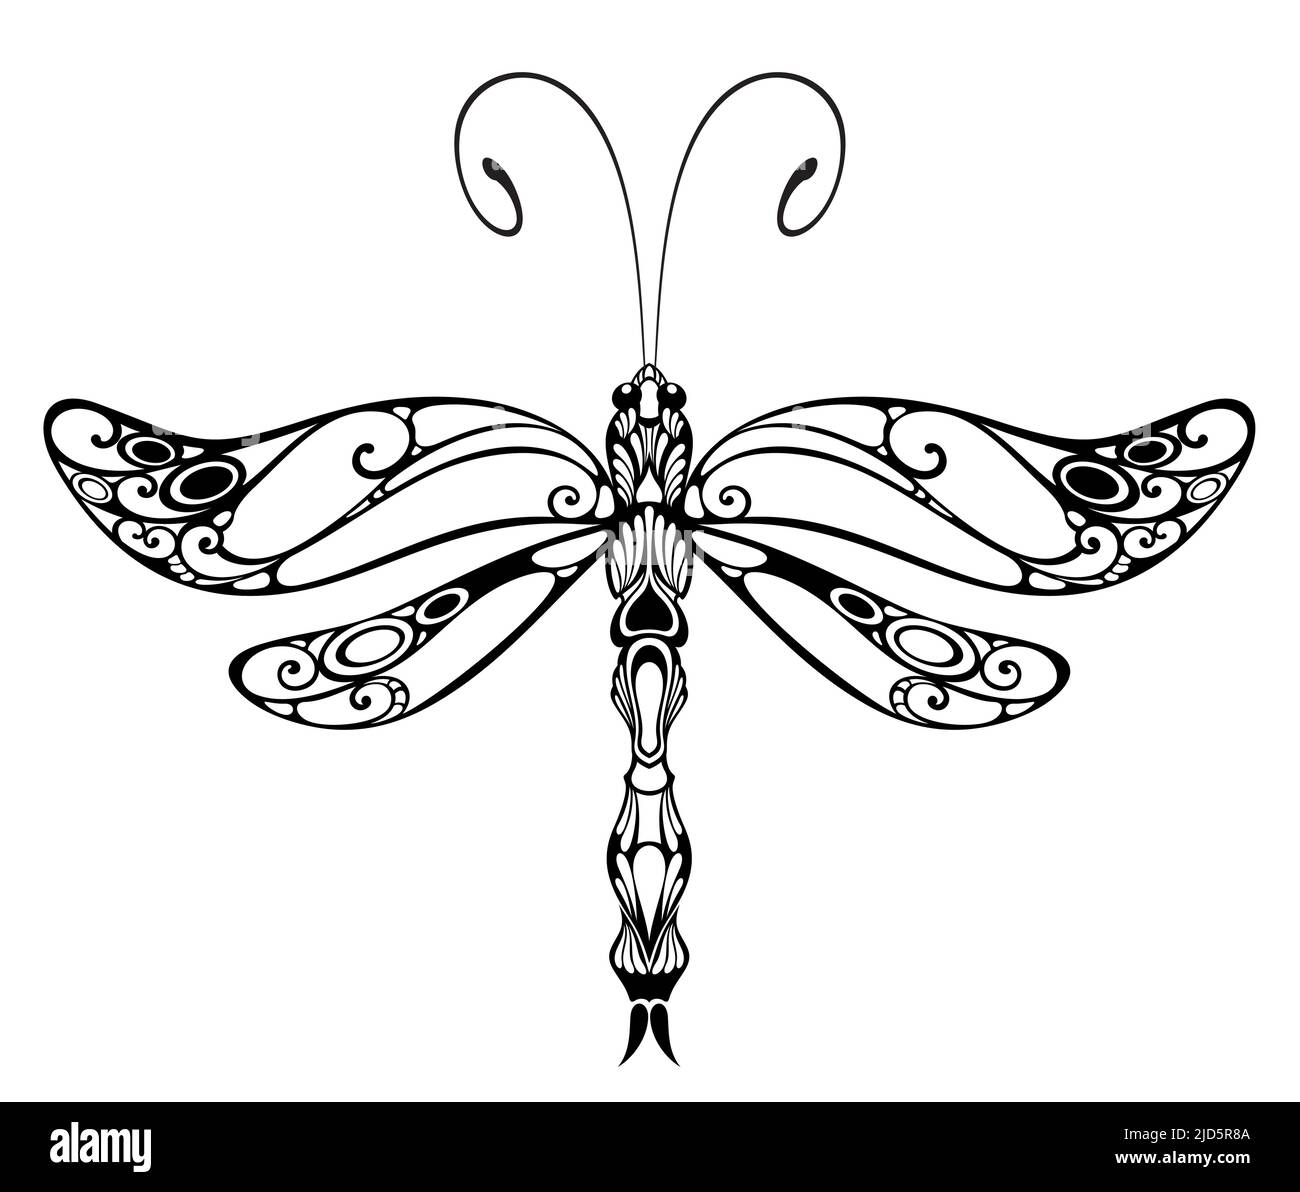 Engrave isolated dragonfly hand drawn graphic illustration Stock Vector